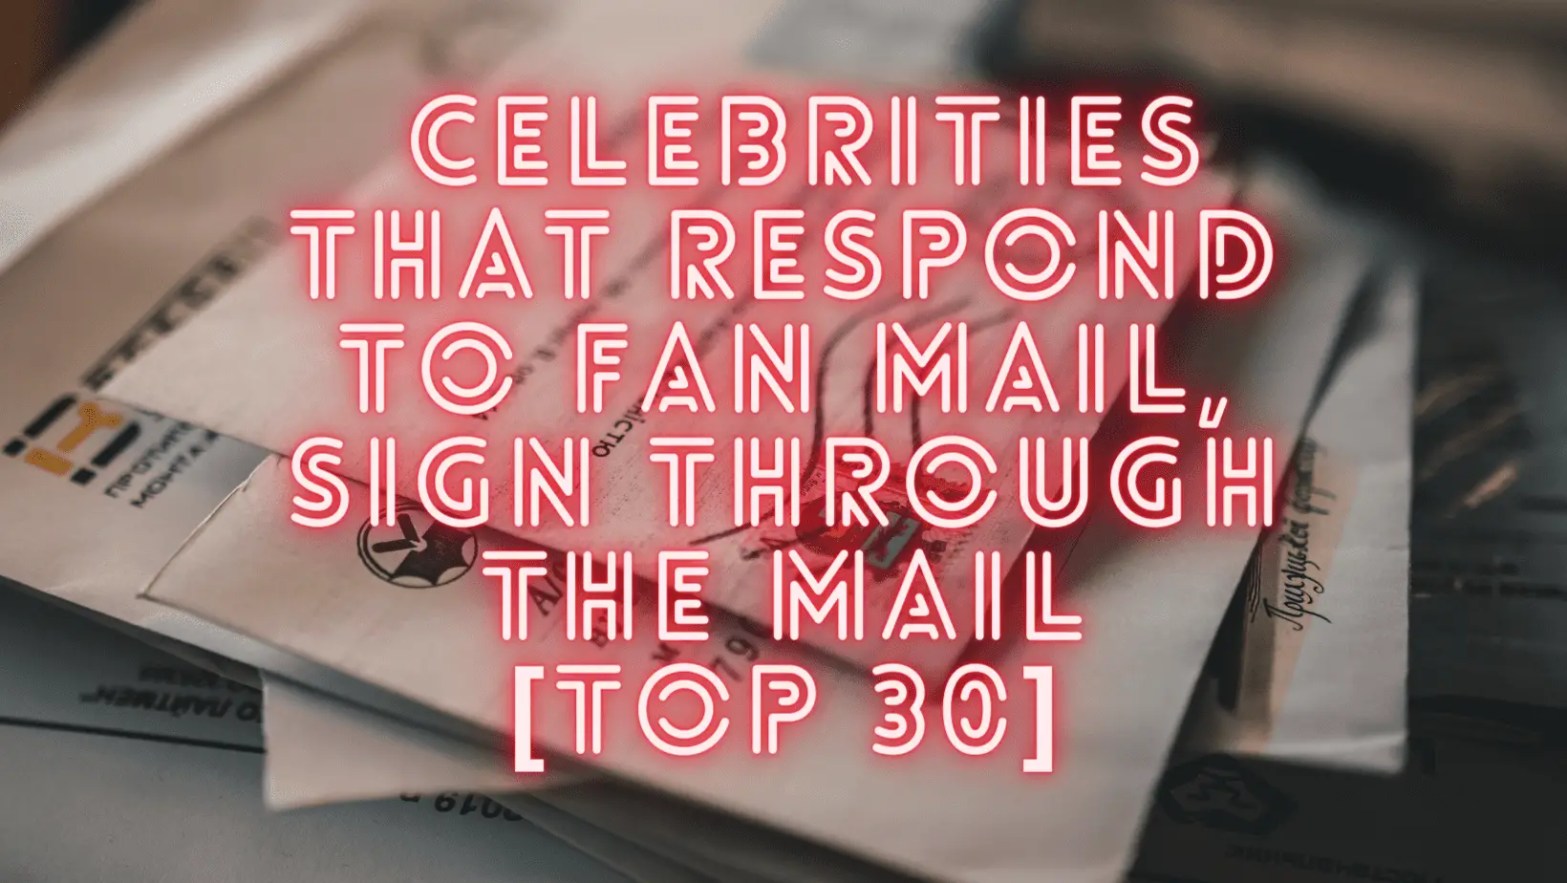 Celebrities that respond to fan mail top 30